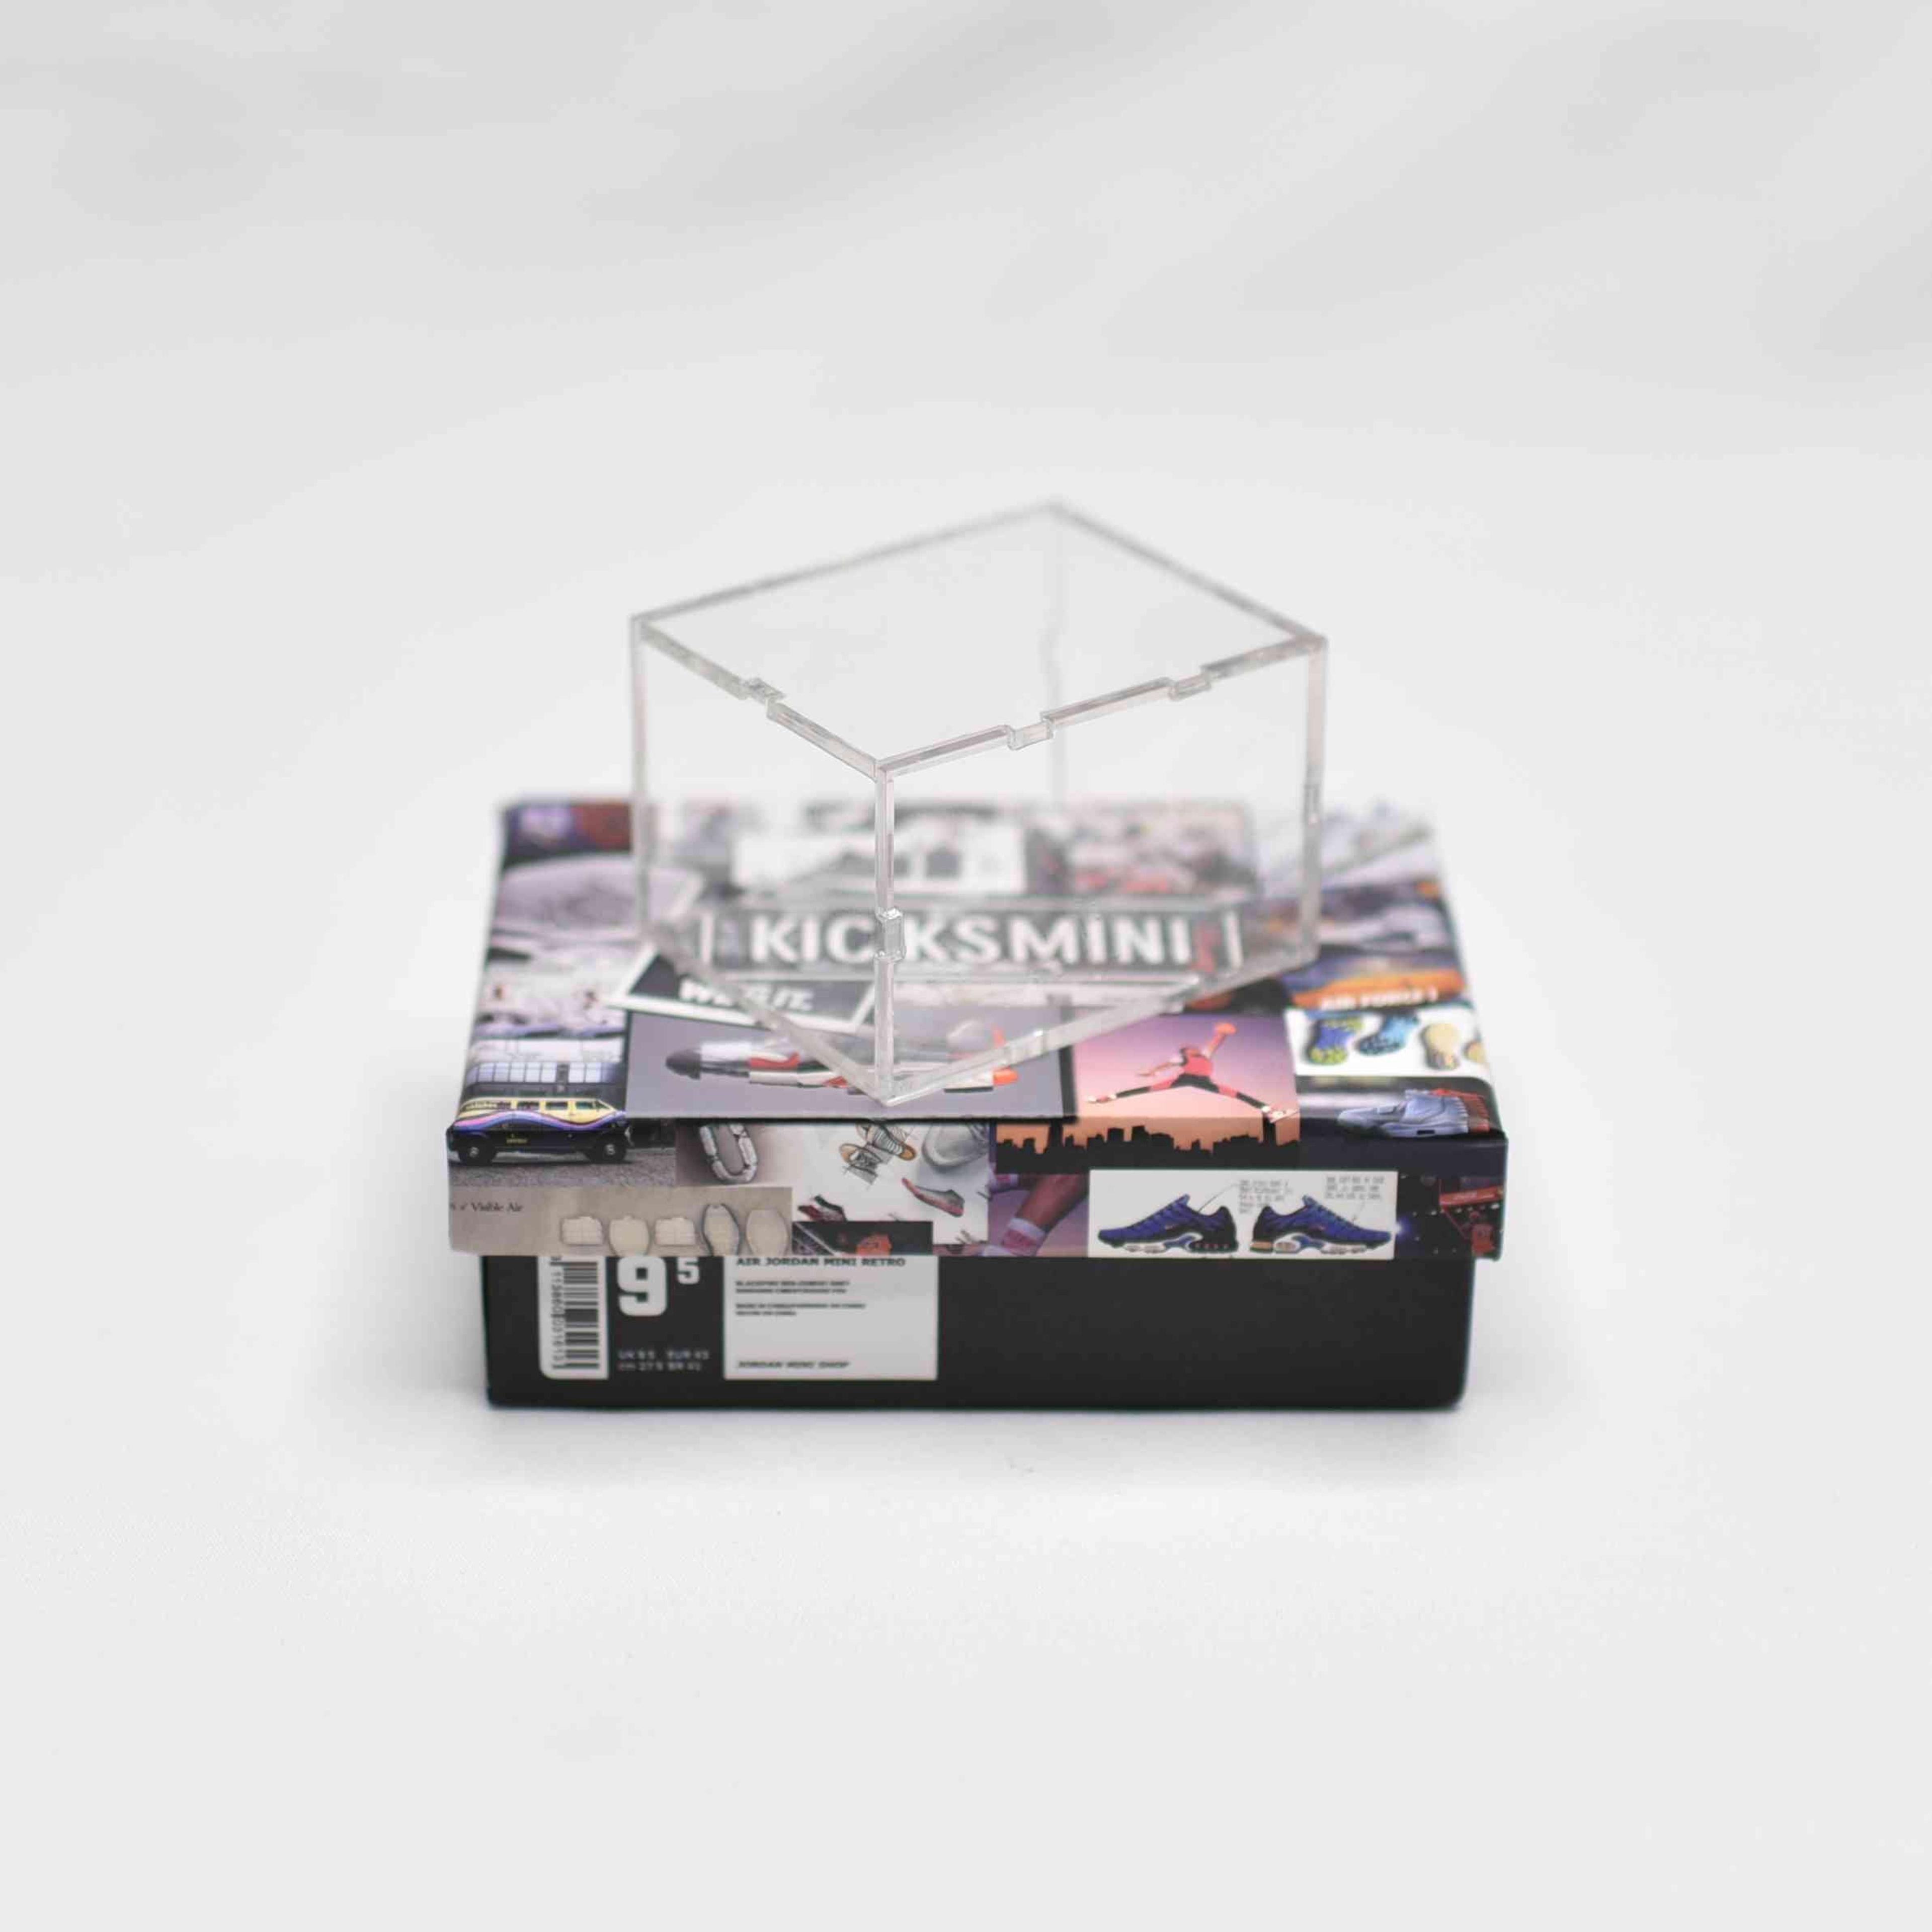 Alternate View 9 of AJ1 Mini Sneakers Collection with Display Case